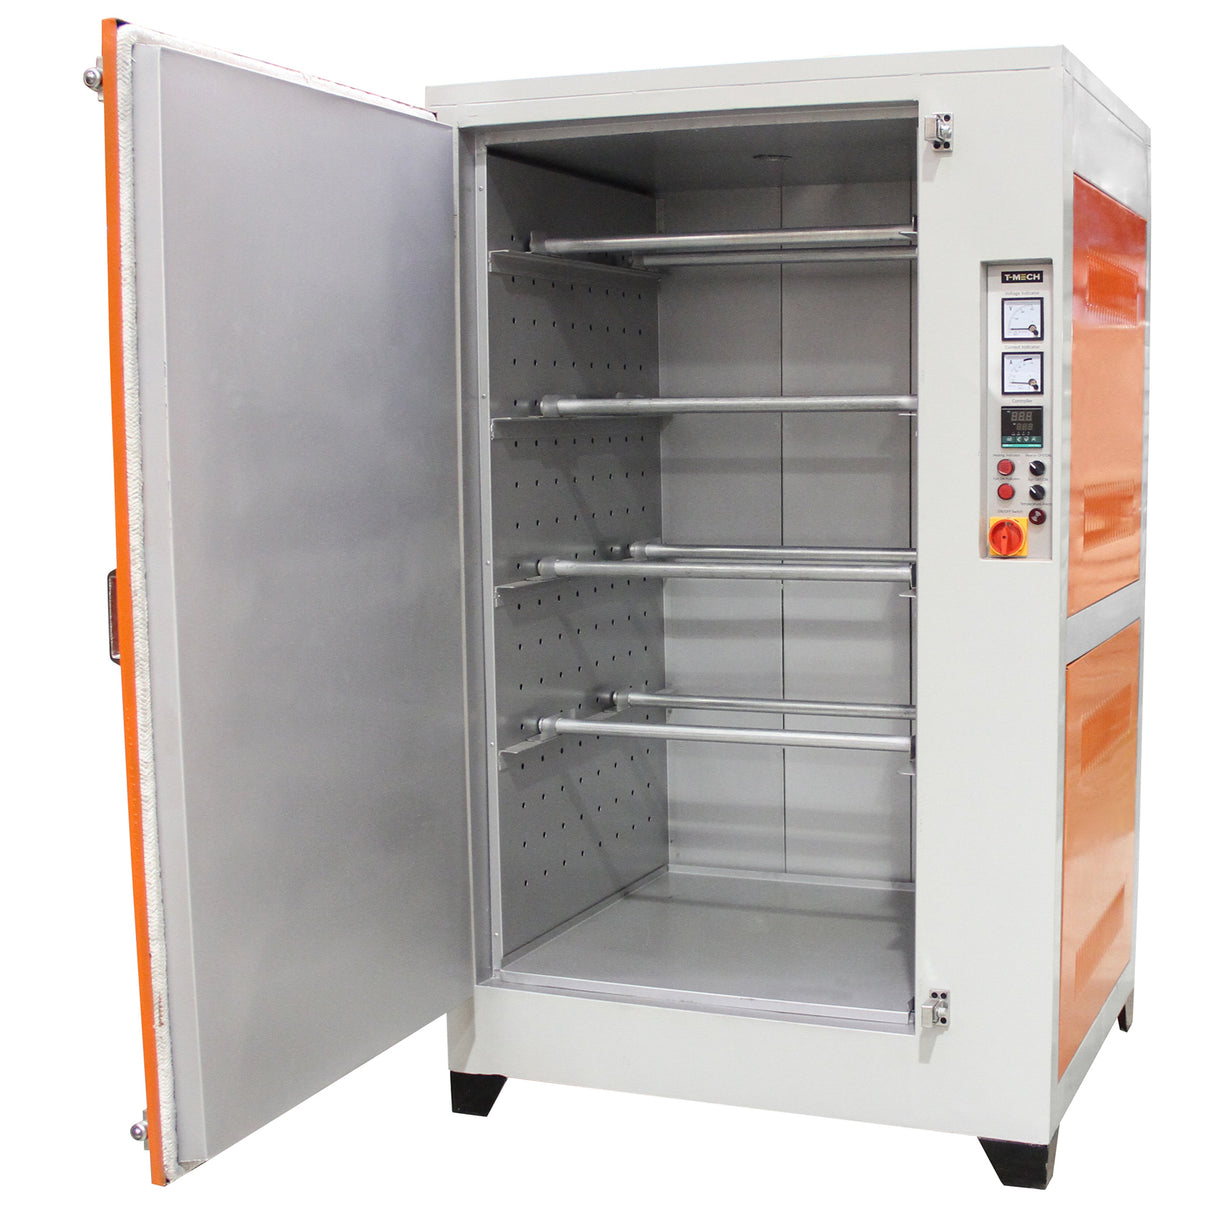 T-Mech Powder Coating Curing Oven